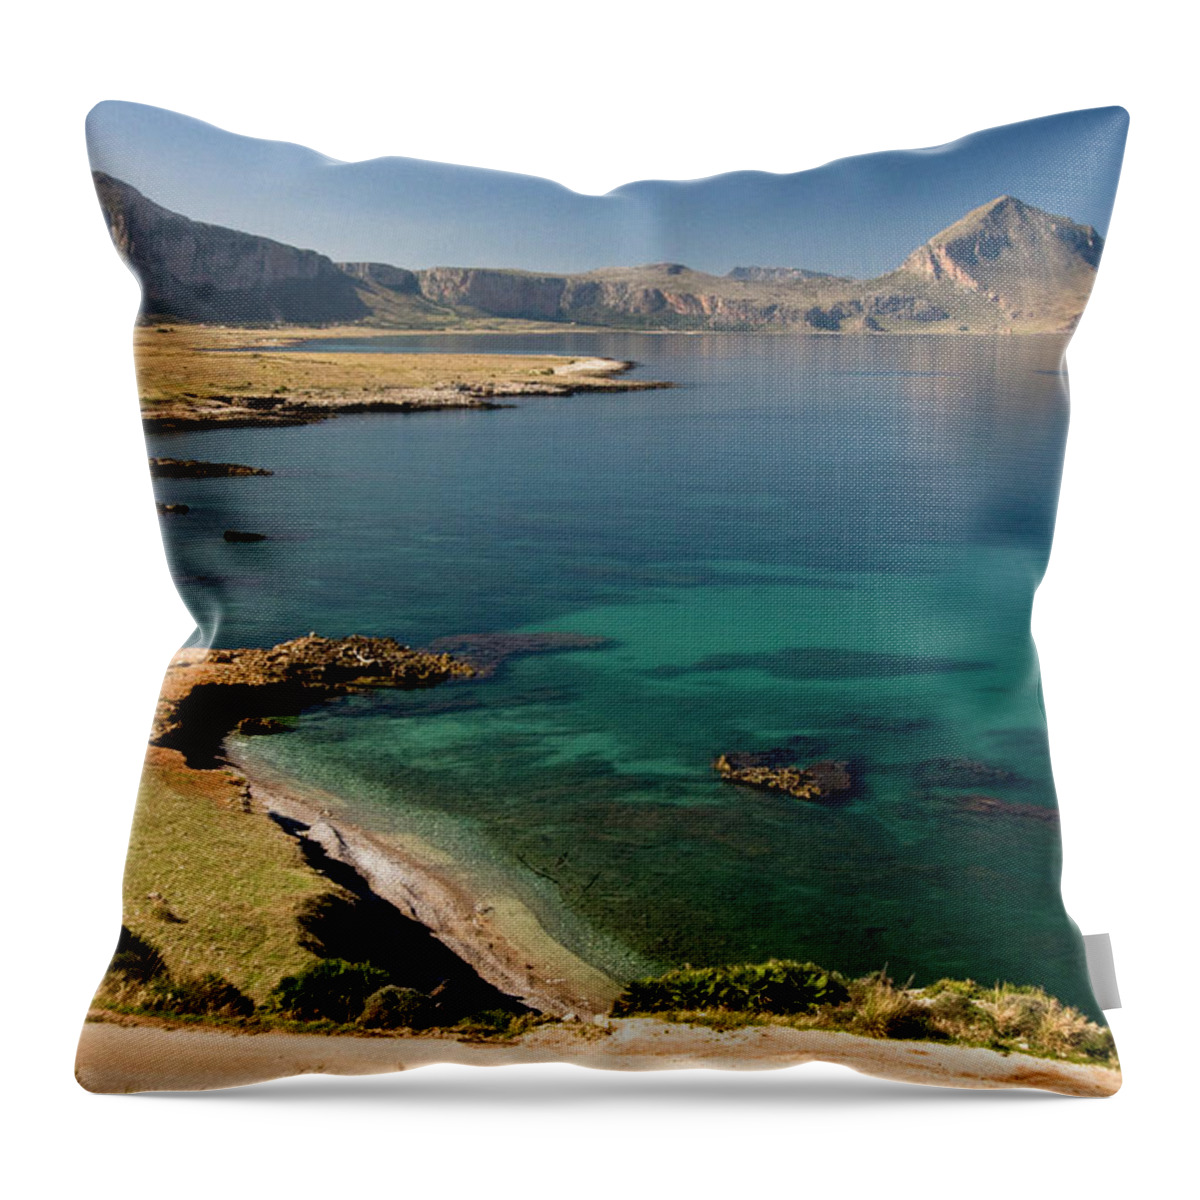 Grass Throw Pillow featuring the photograph Sea And The Mountain In Sicily by Luciano Grasso